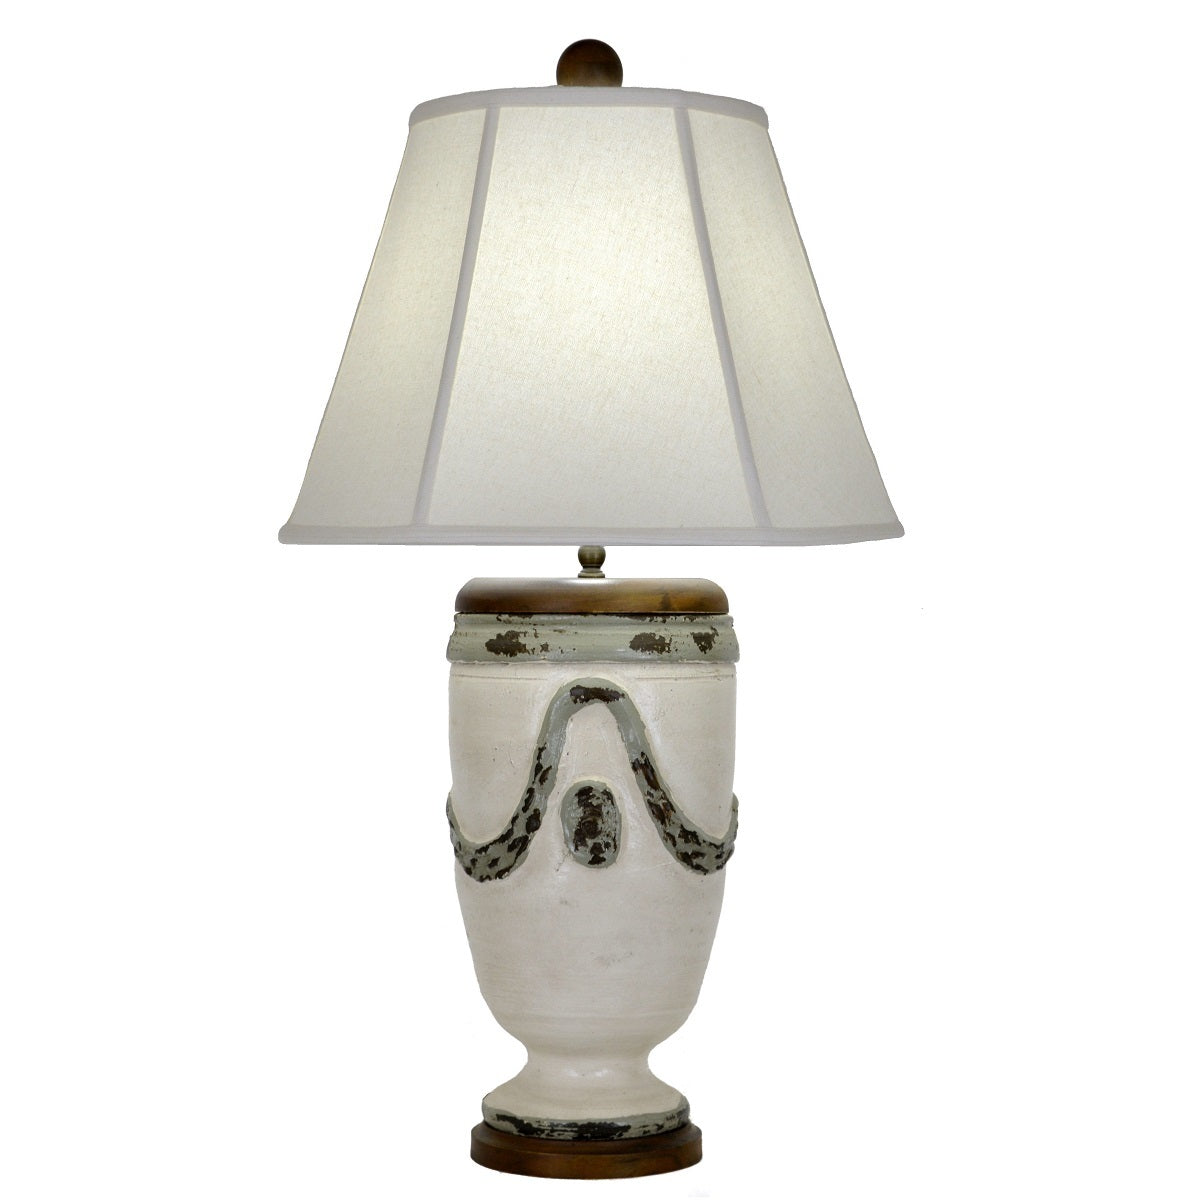 Orion White and Green Pottery Table Lamp - Lillian Home 